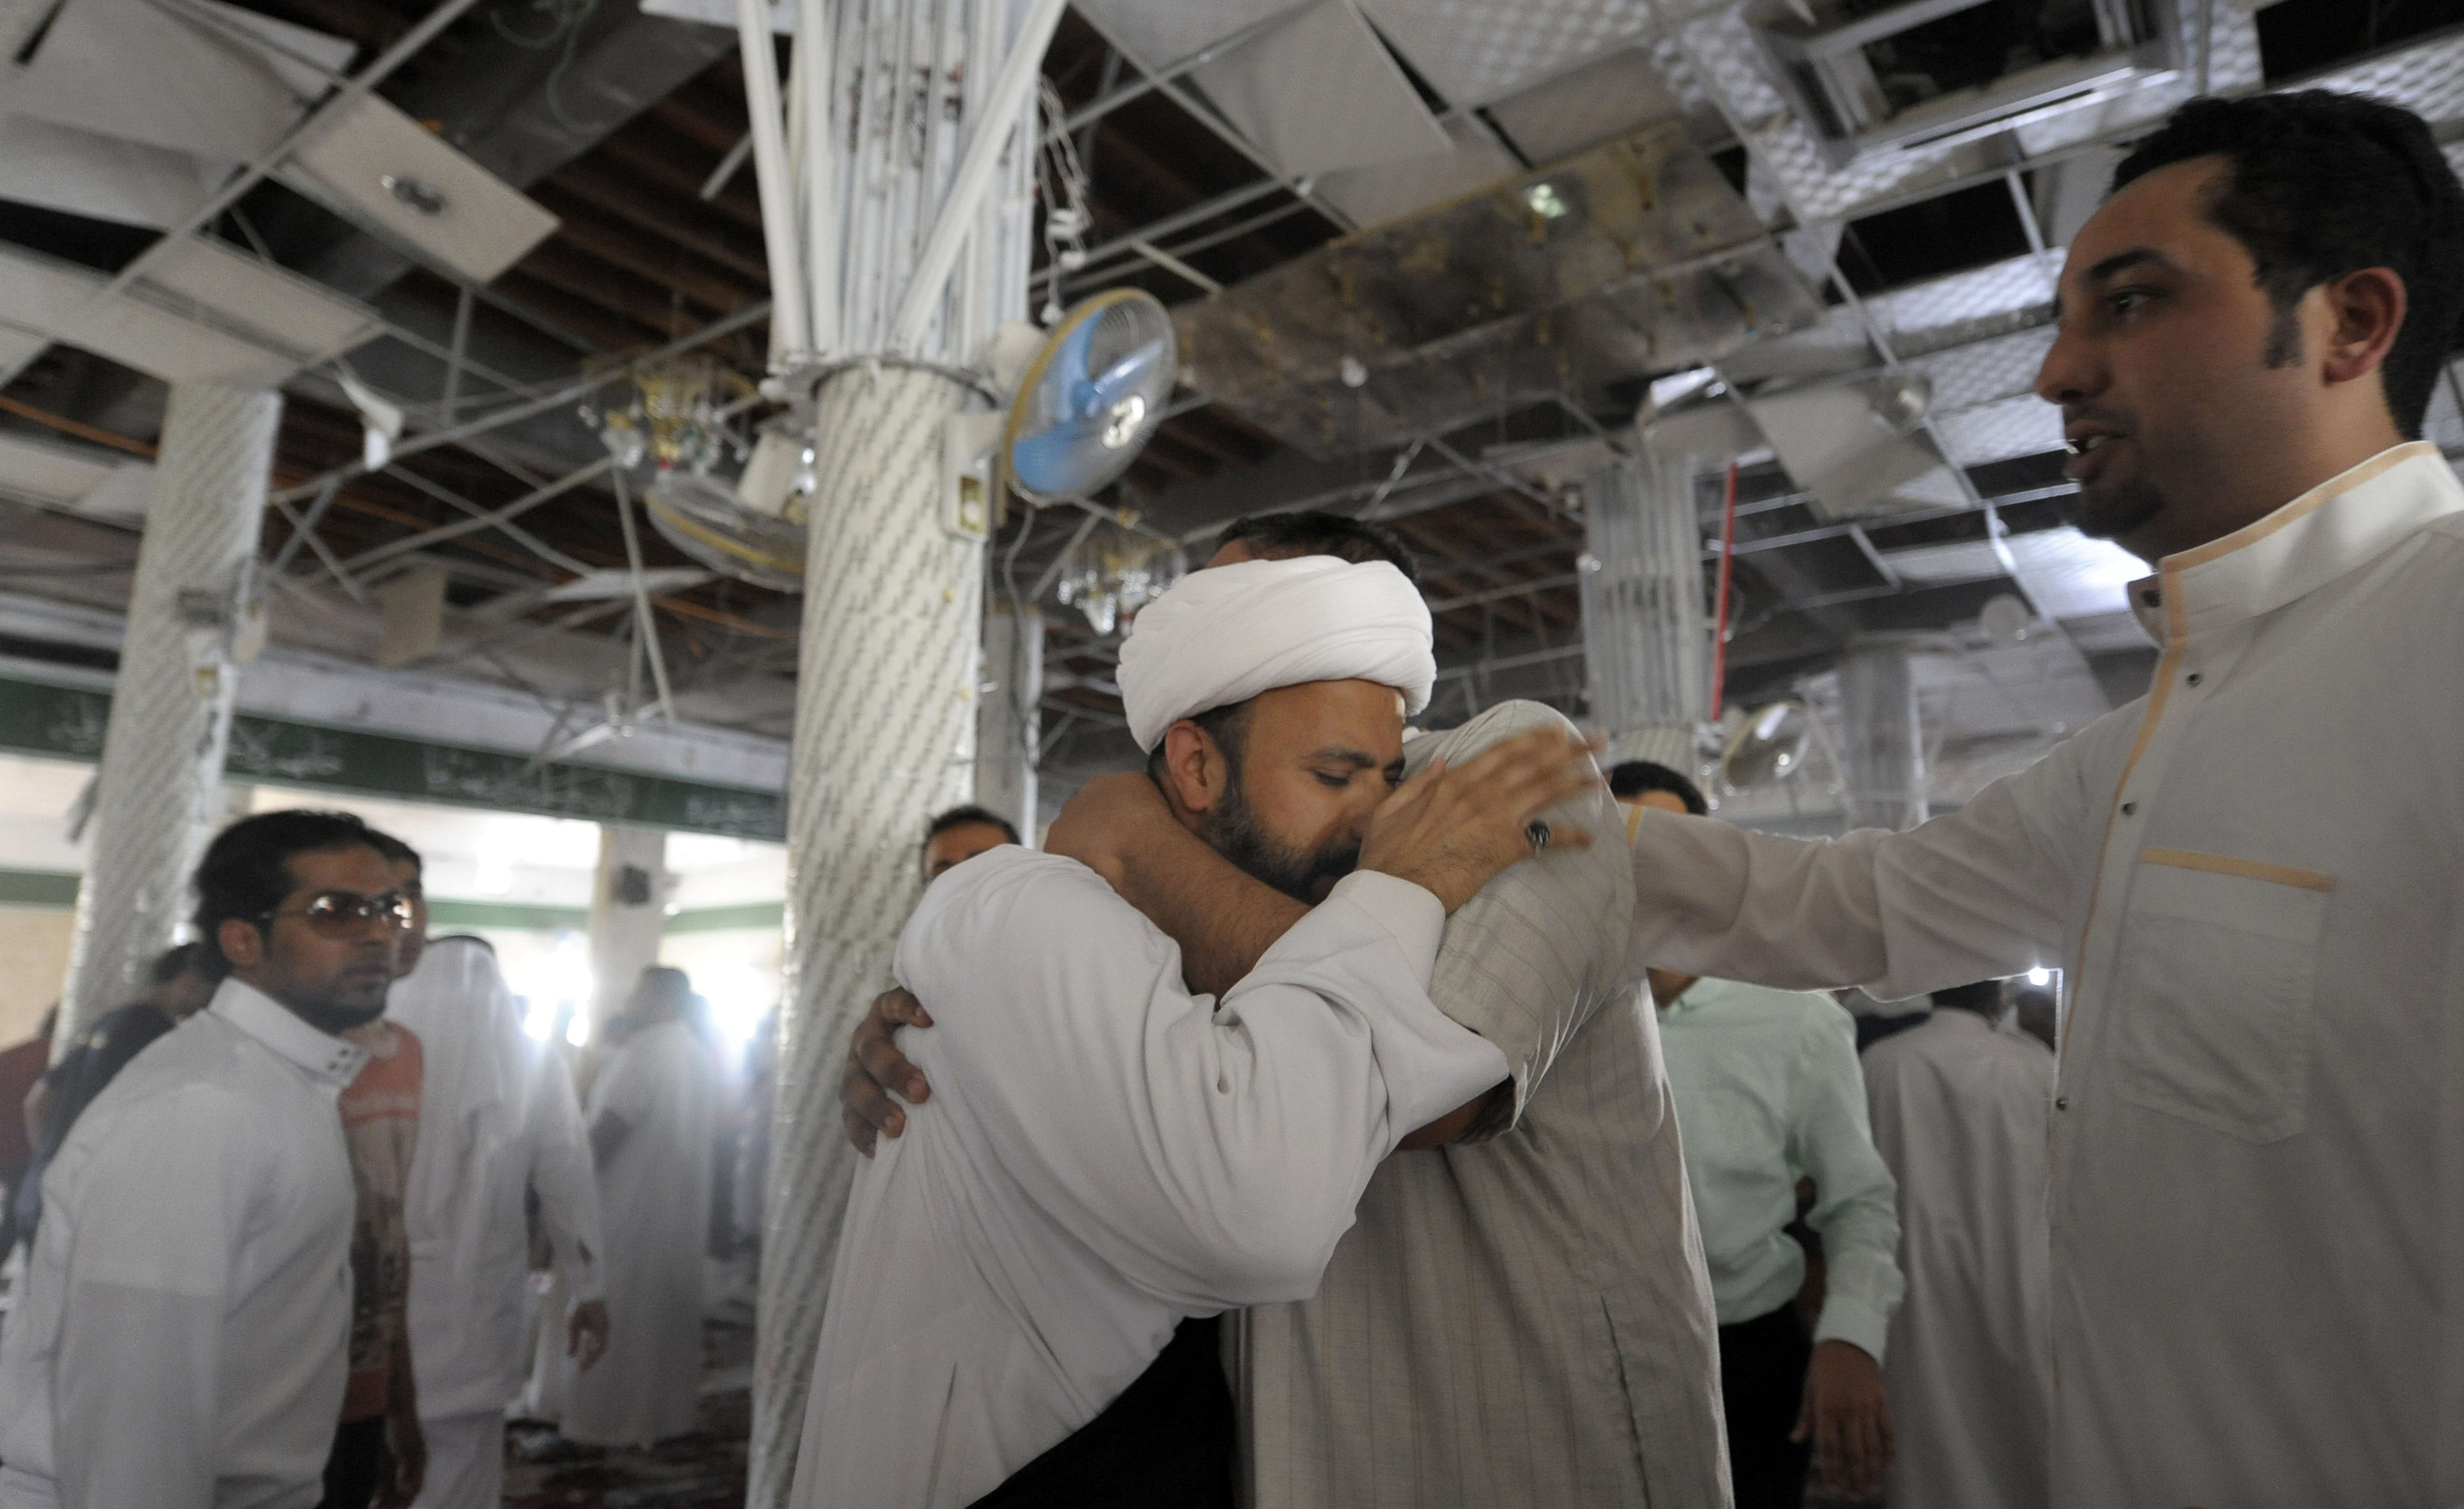 A Saudi man reacts following the blast at the mosque in Qatif on 22 May.